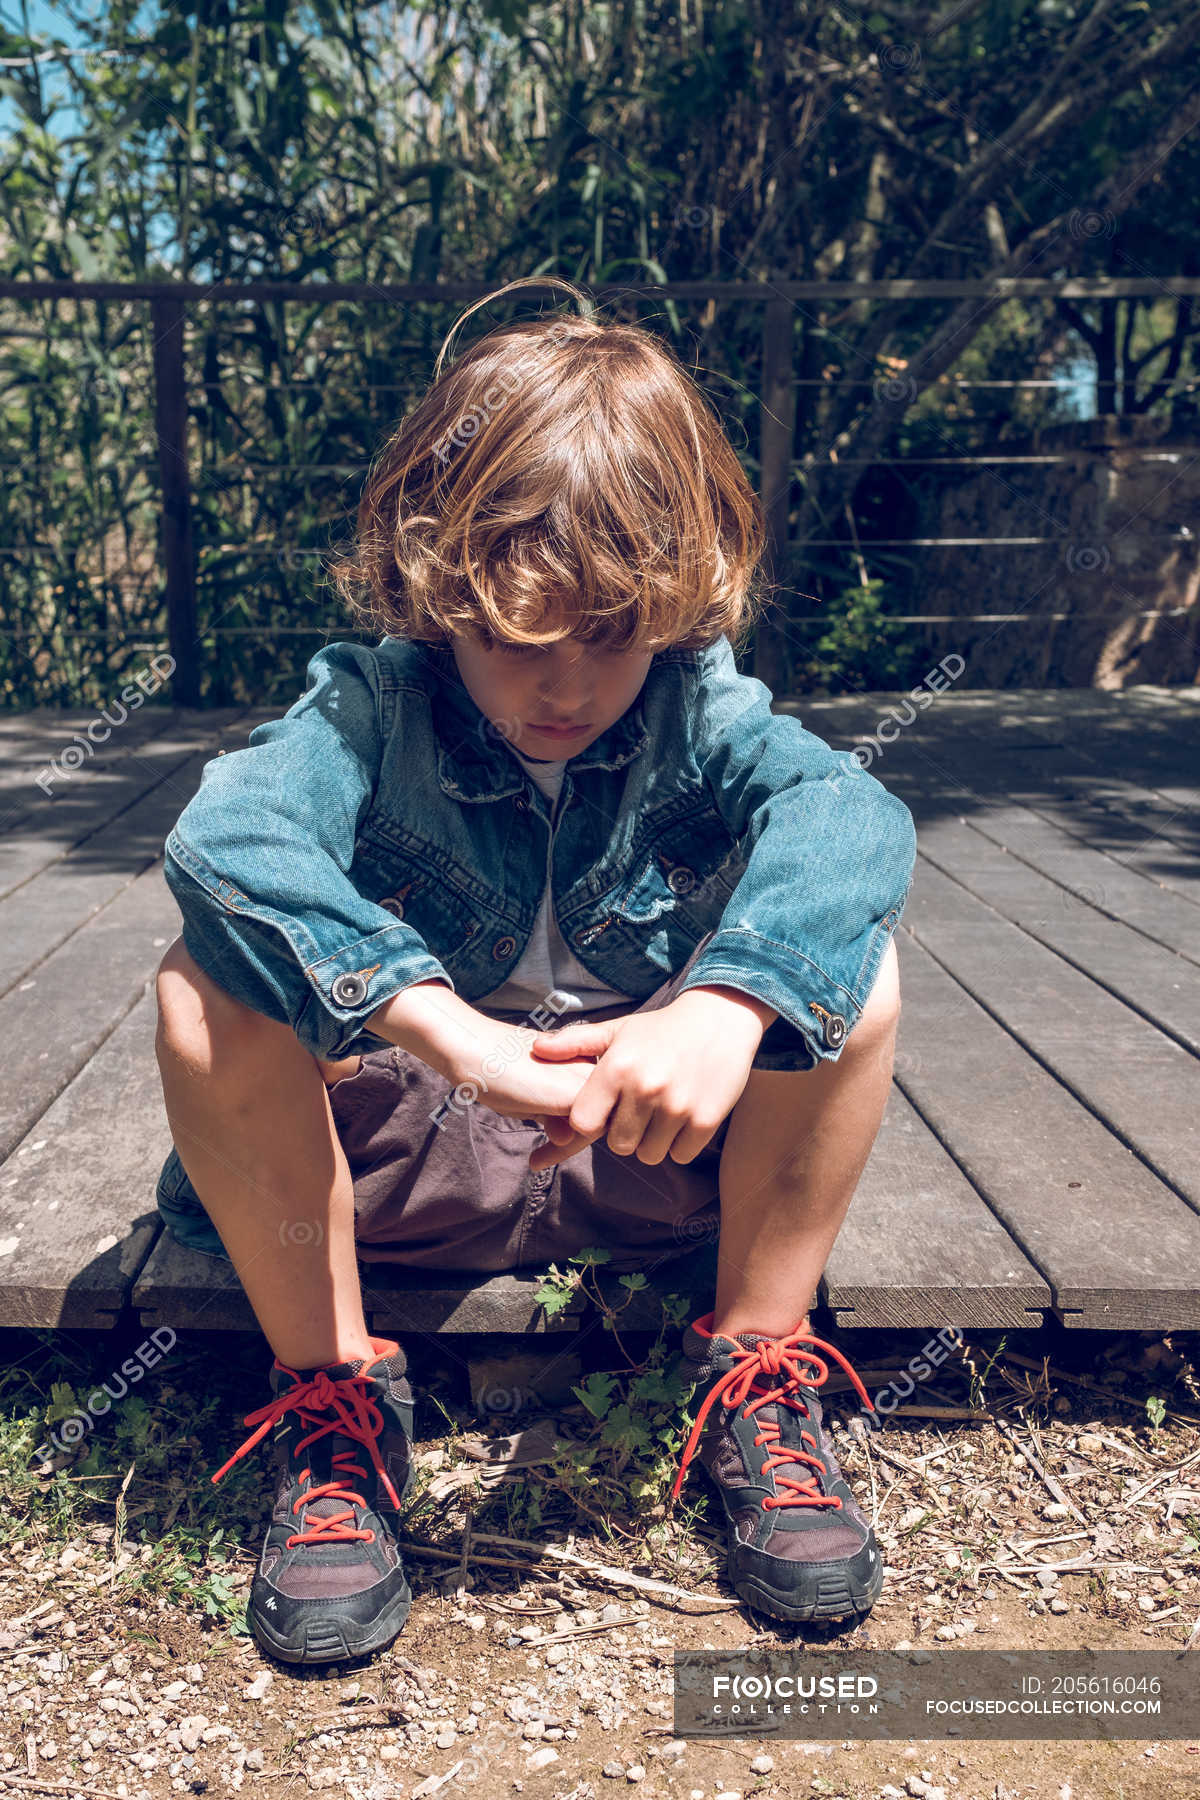 Cute Elementary Age Boy With Curly Blond Hair Sitting On Wooden